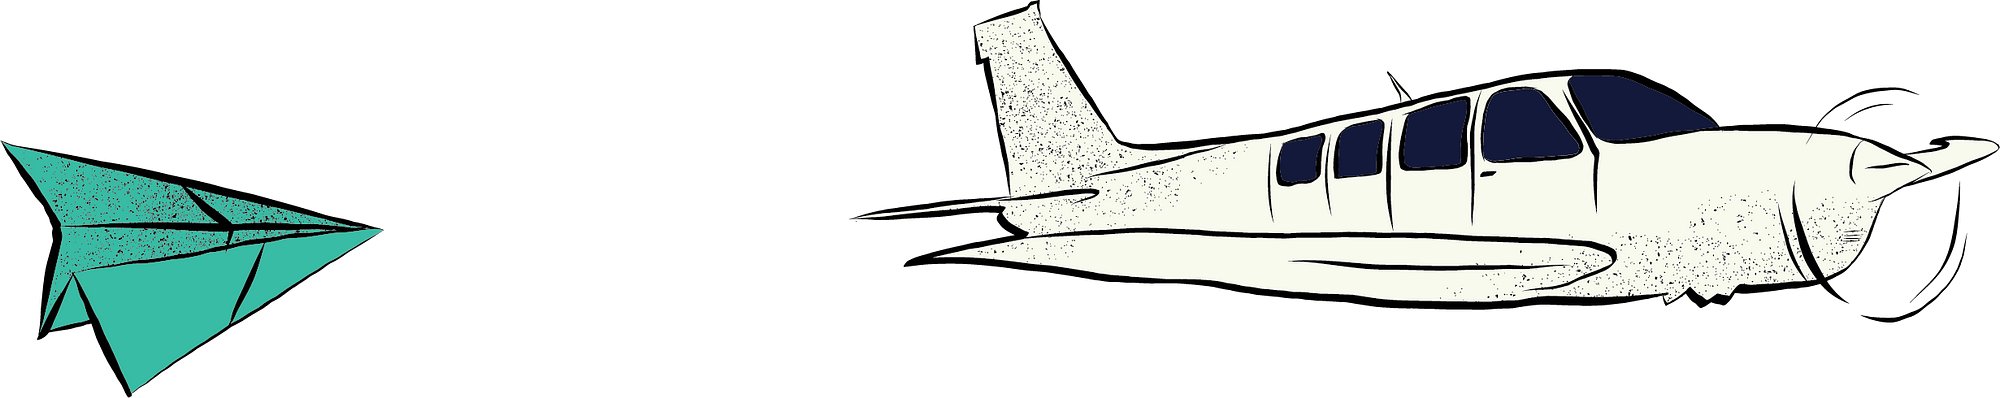 A paper plane on the left and a modern jet on the right. Hand-drawn graphic.